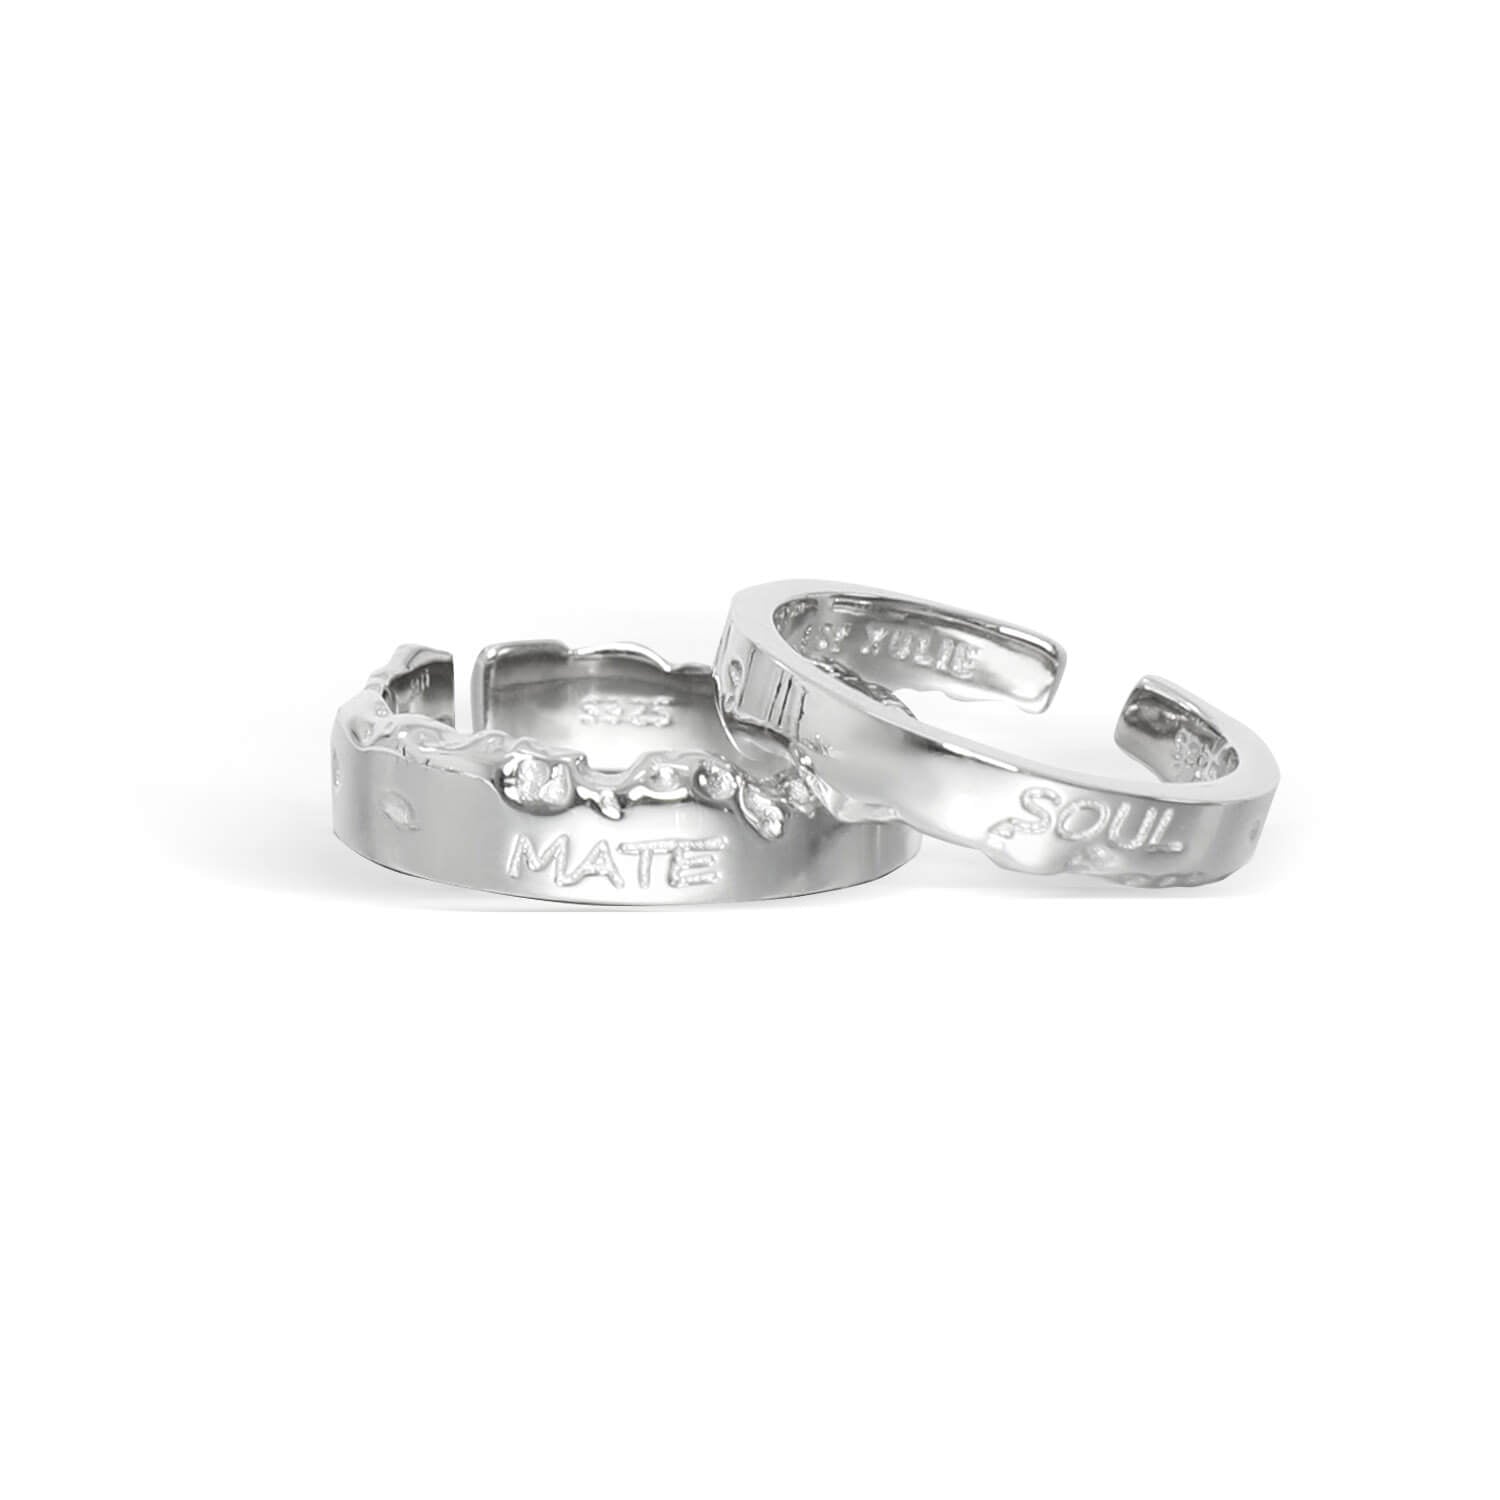 Sterling Silver Infinity Knot Matching Couple Rings For Best Friends  [MR-1786] - $79.00 : iDream Jewelry